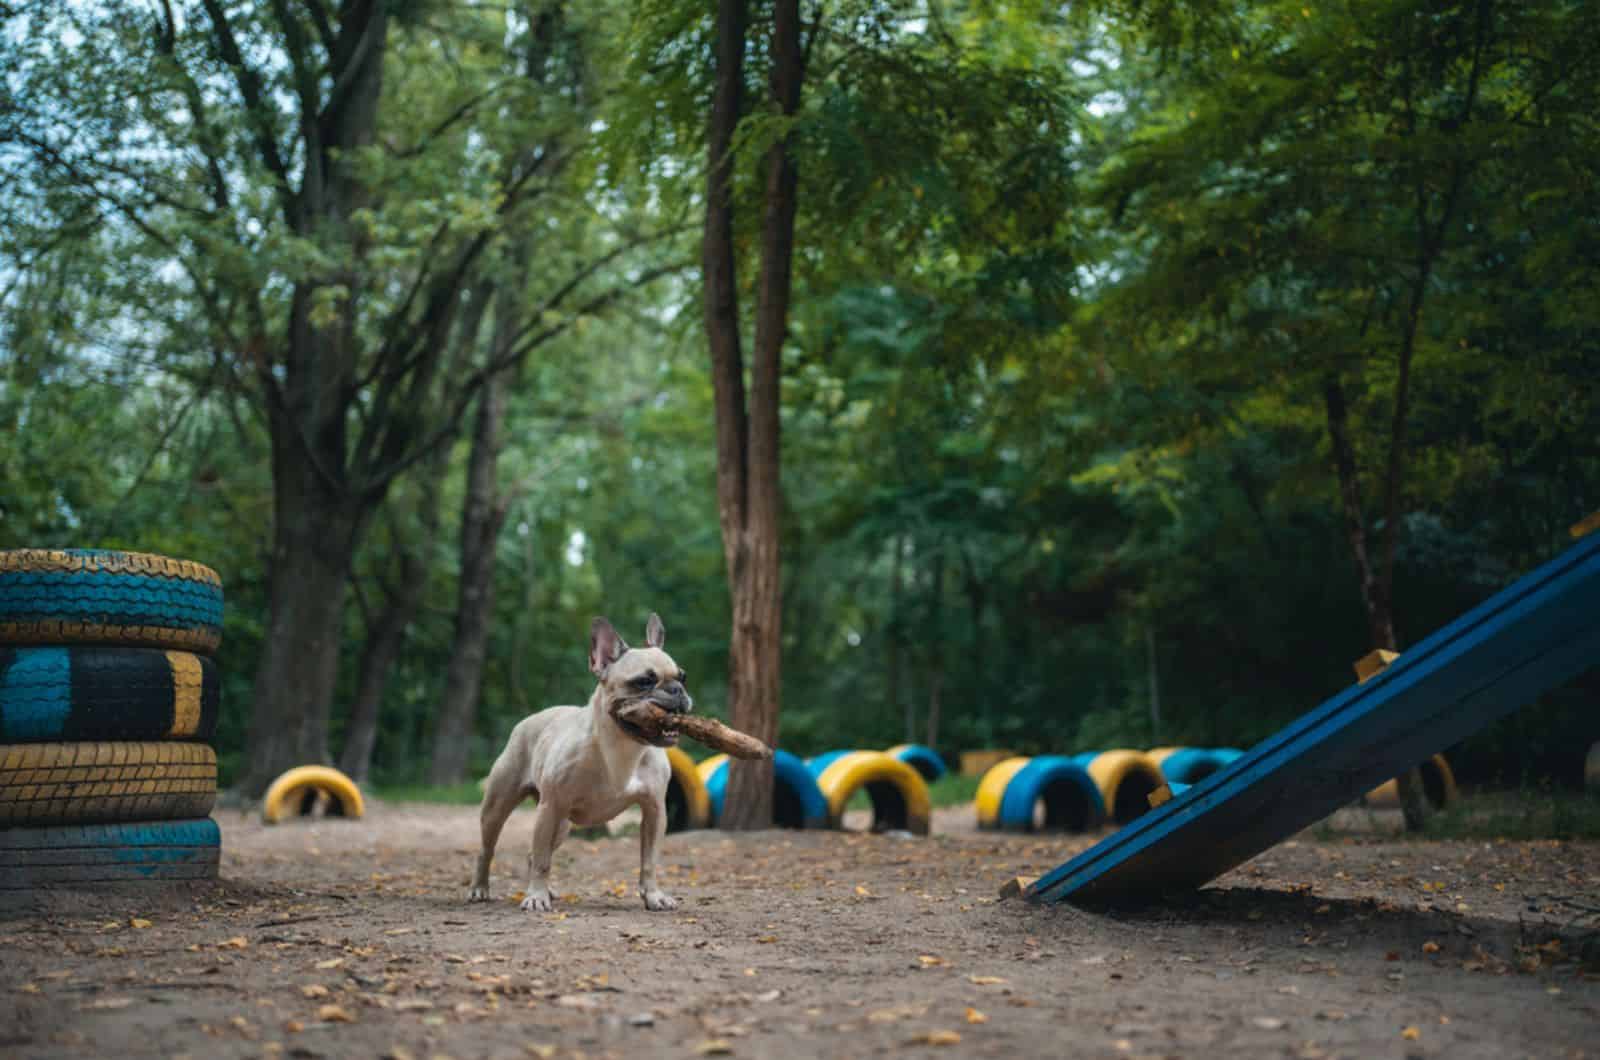 young playful french bulldog dog in the dog park